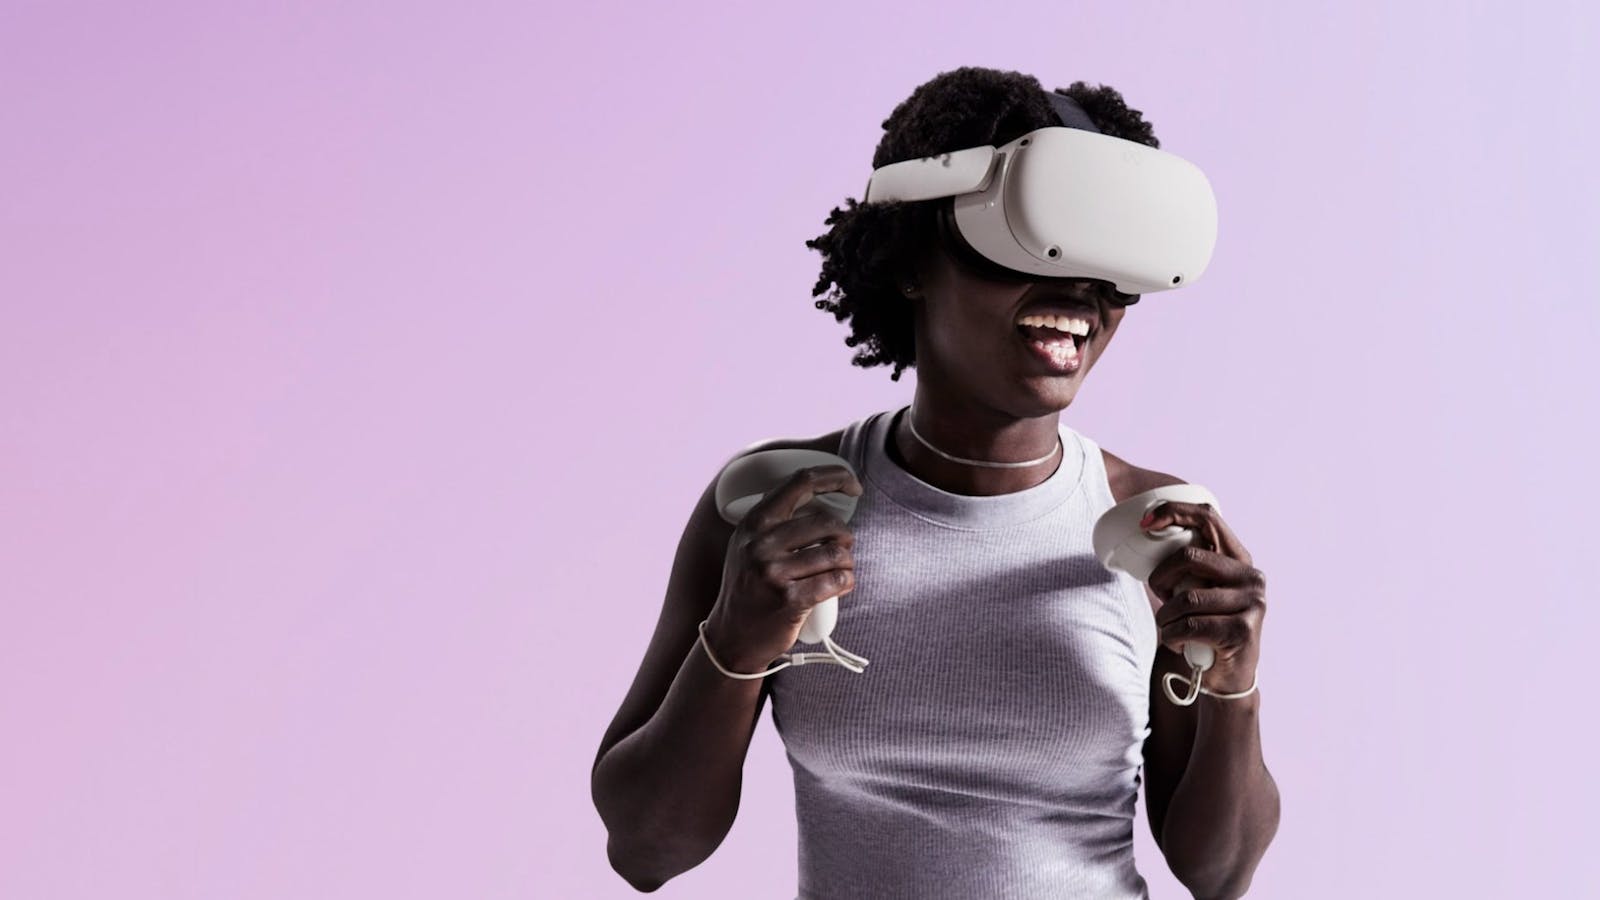 A promotional image for the Quest 2 VR headset. Photo: Meta Platforms.